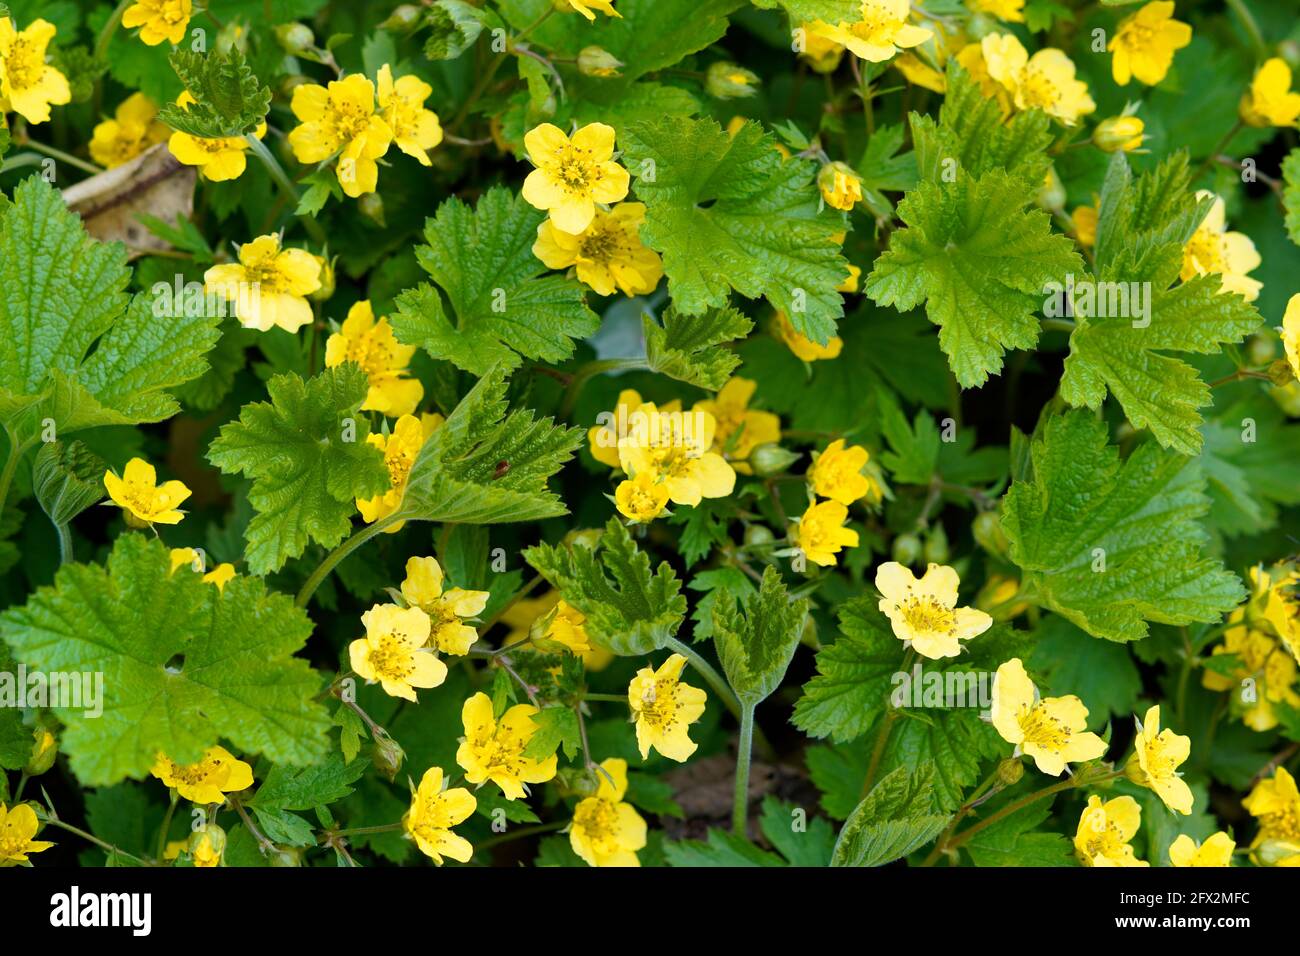 Waldsteinia ternata, golden strawberry close-up. Green perennial in the garden with yellow flowers. Hardy plants. Low-maintenance ground cover Stock Photo